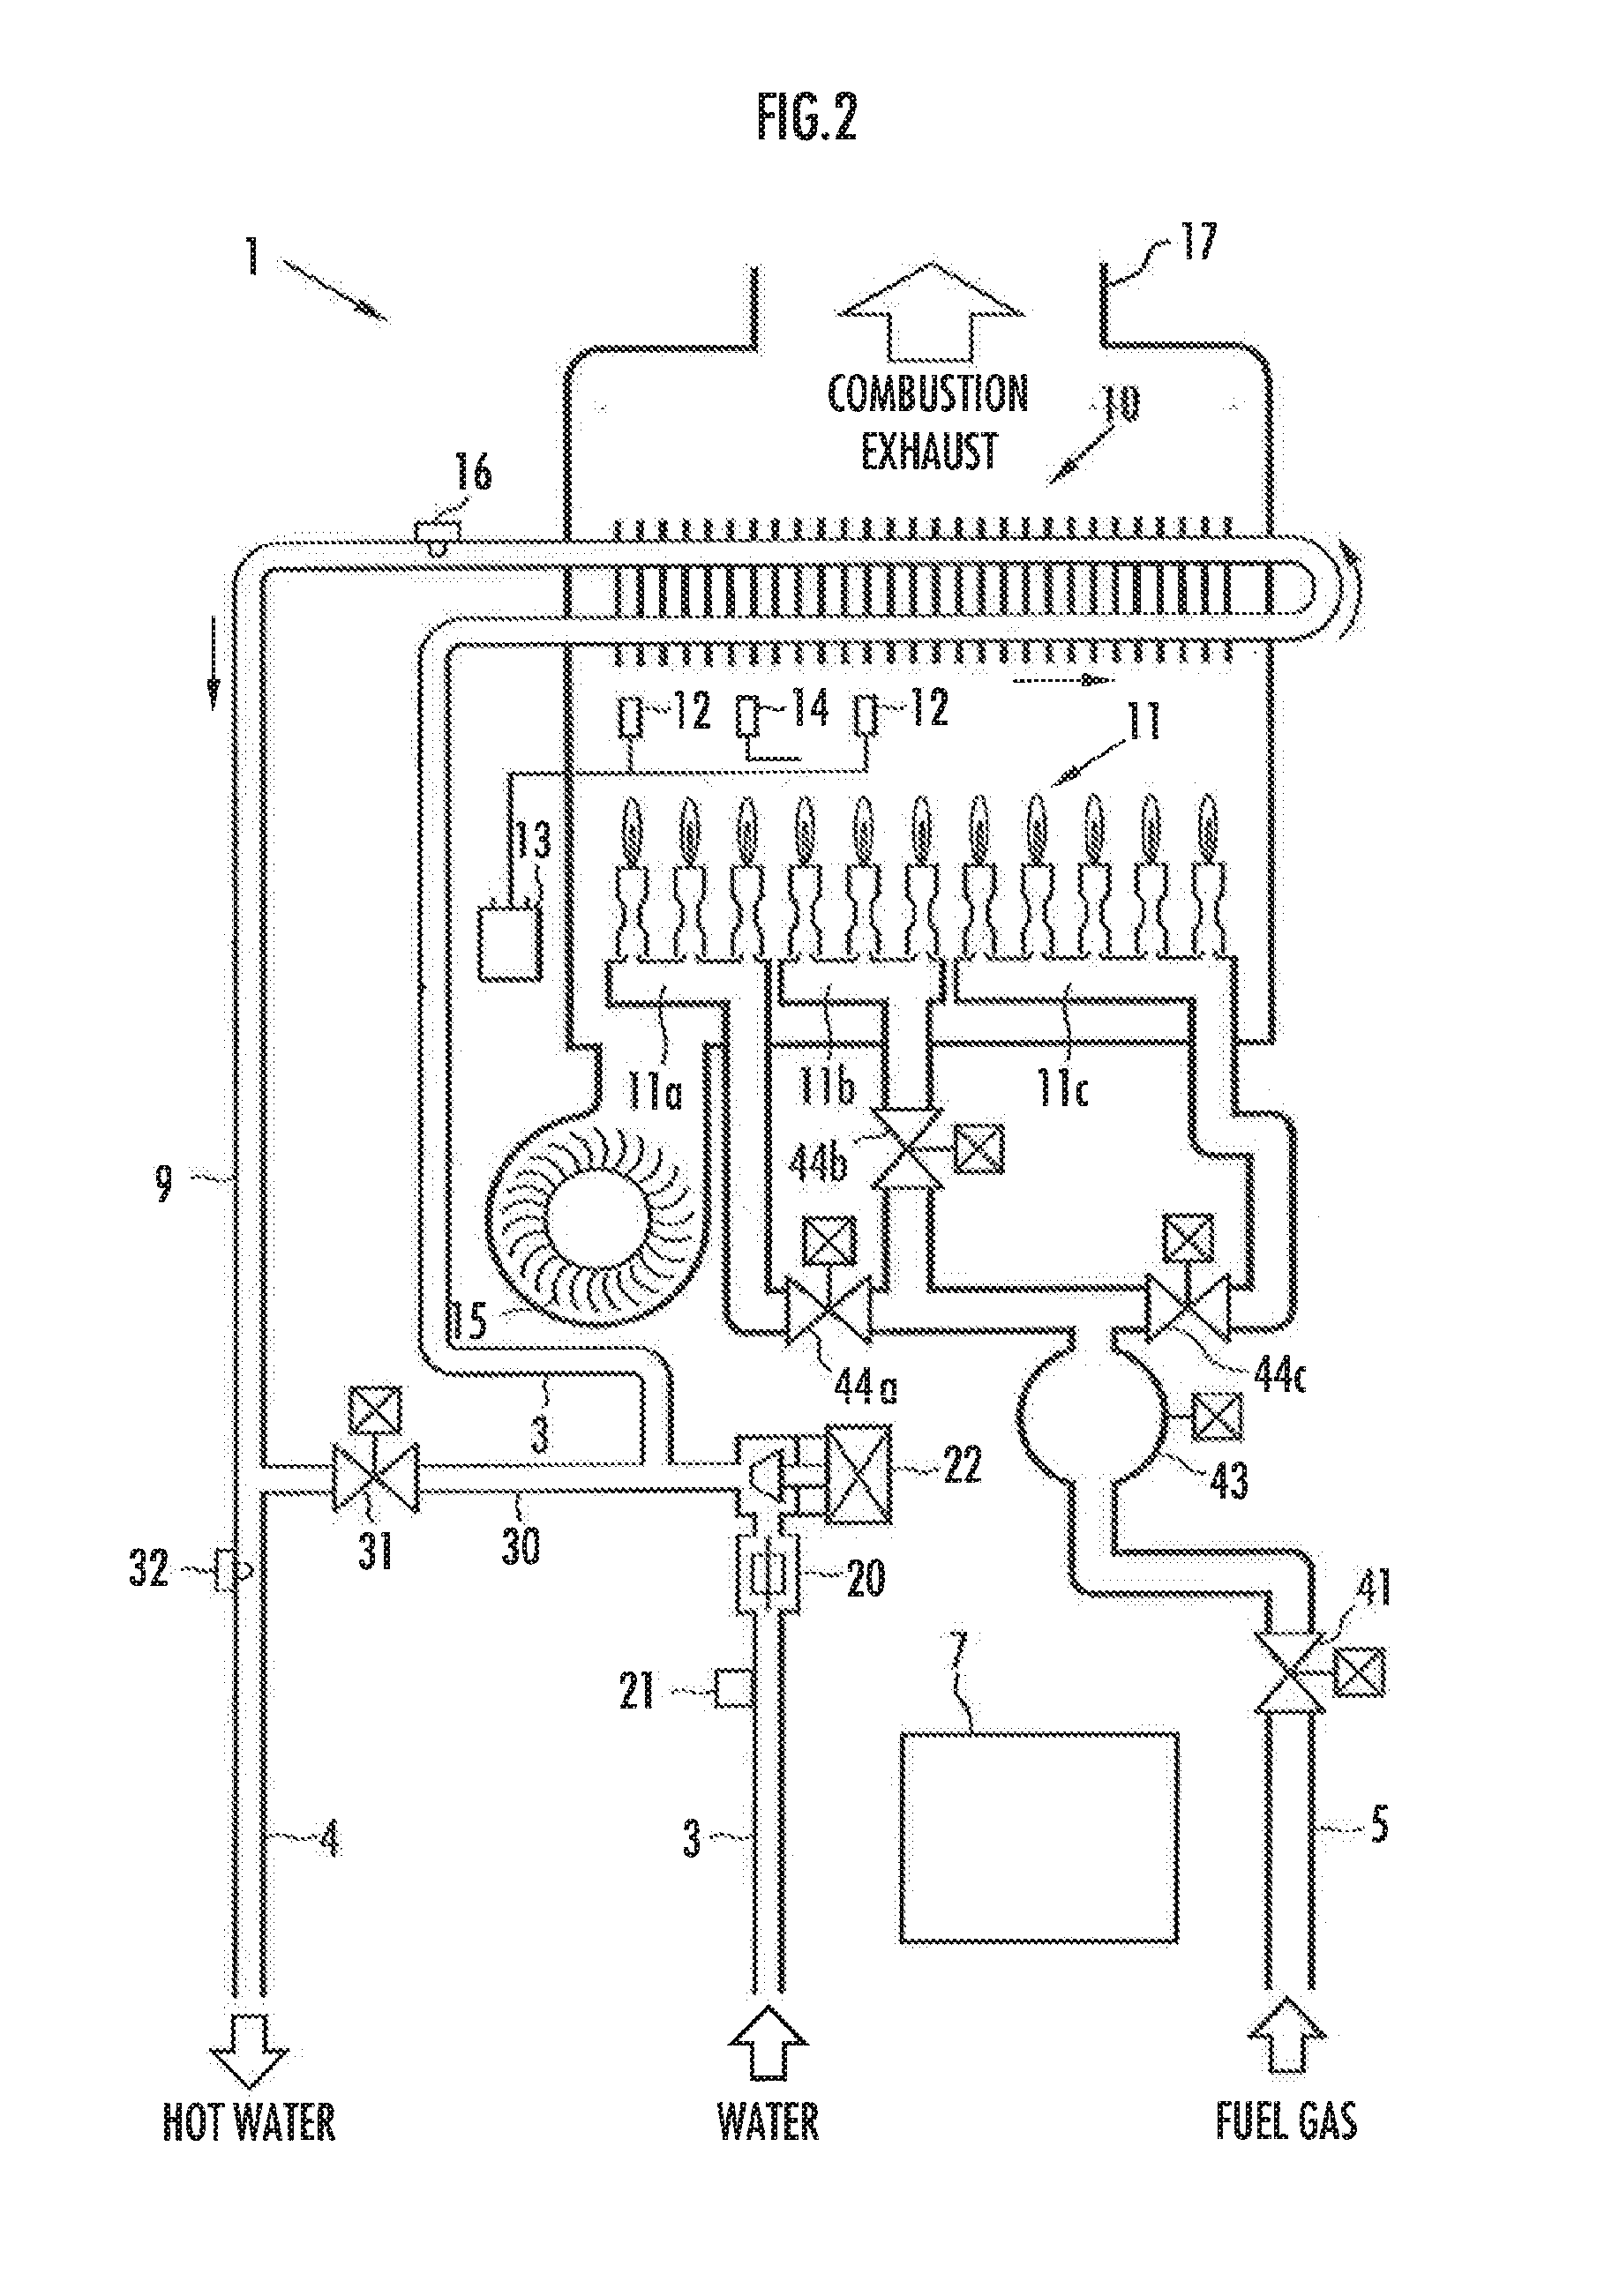 Connected hot-water supply system